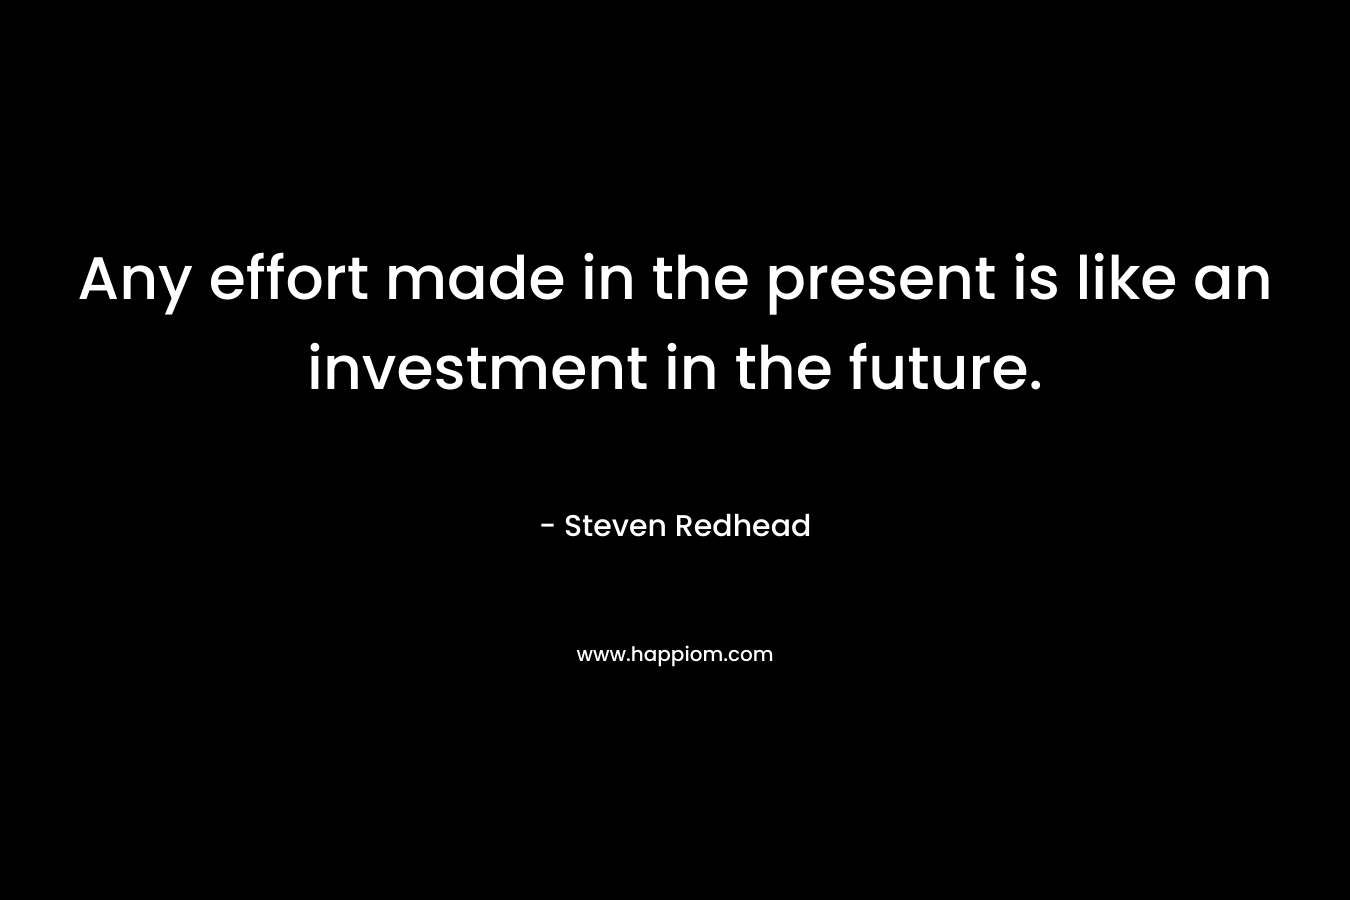 Any effort made in the present is like an investment in the future. – Steven Redhead